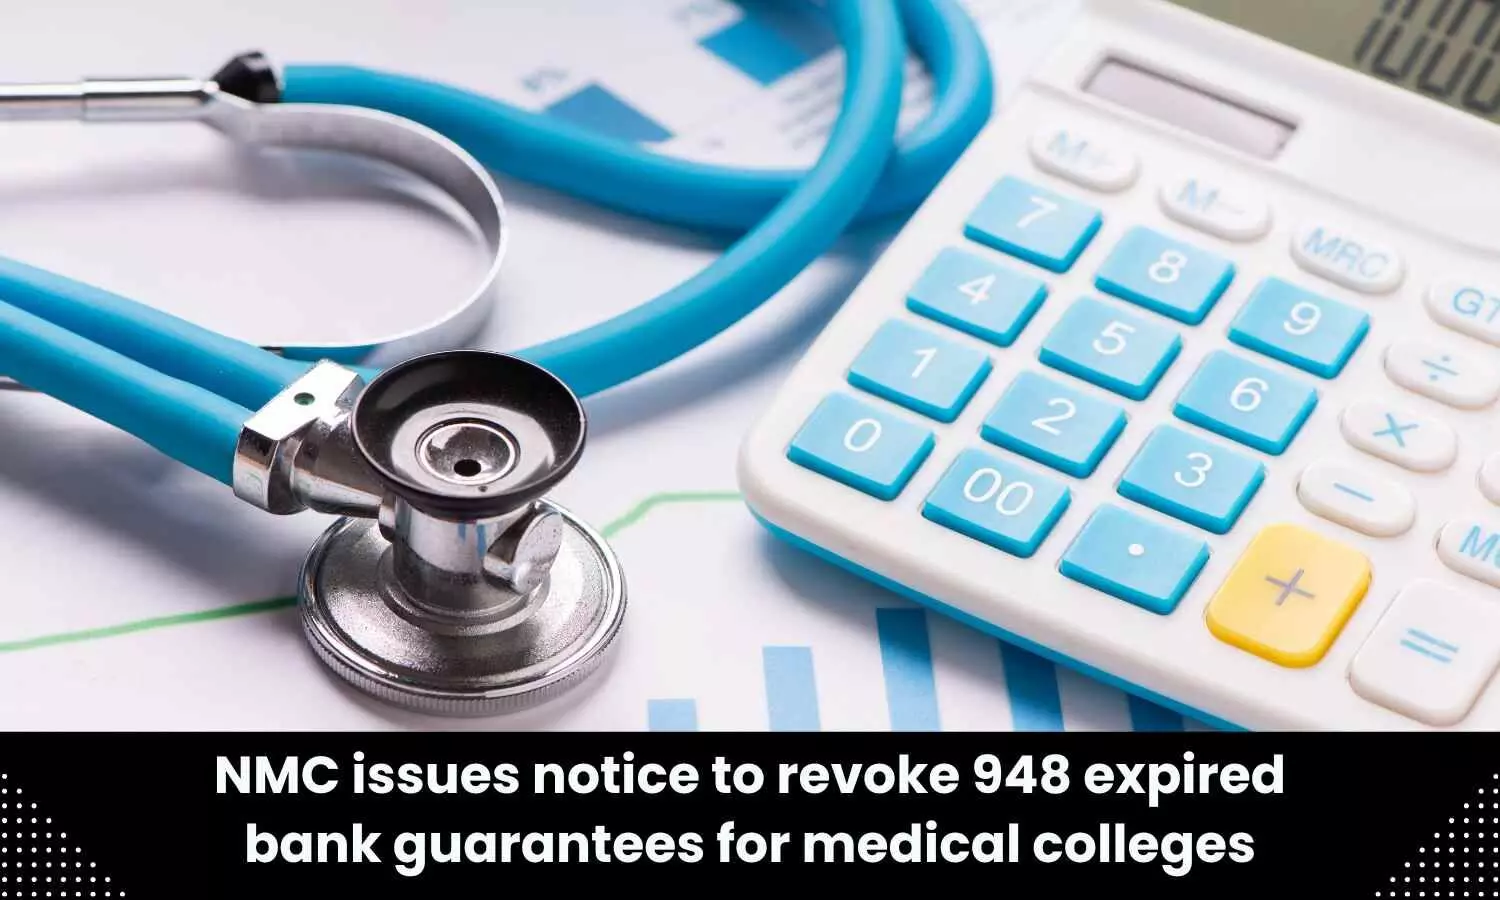 Revoke 948 expired bank guarantees: Notice for medical colleges, banks issued by NMC